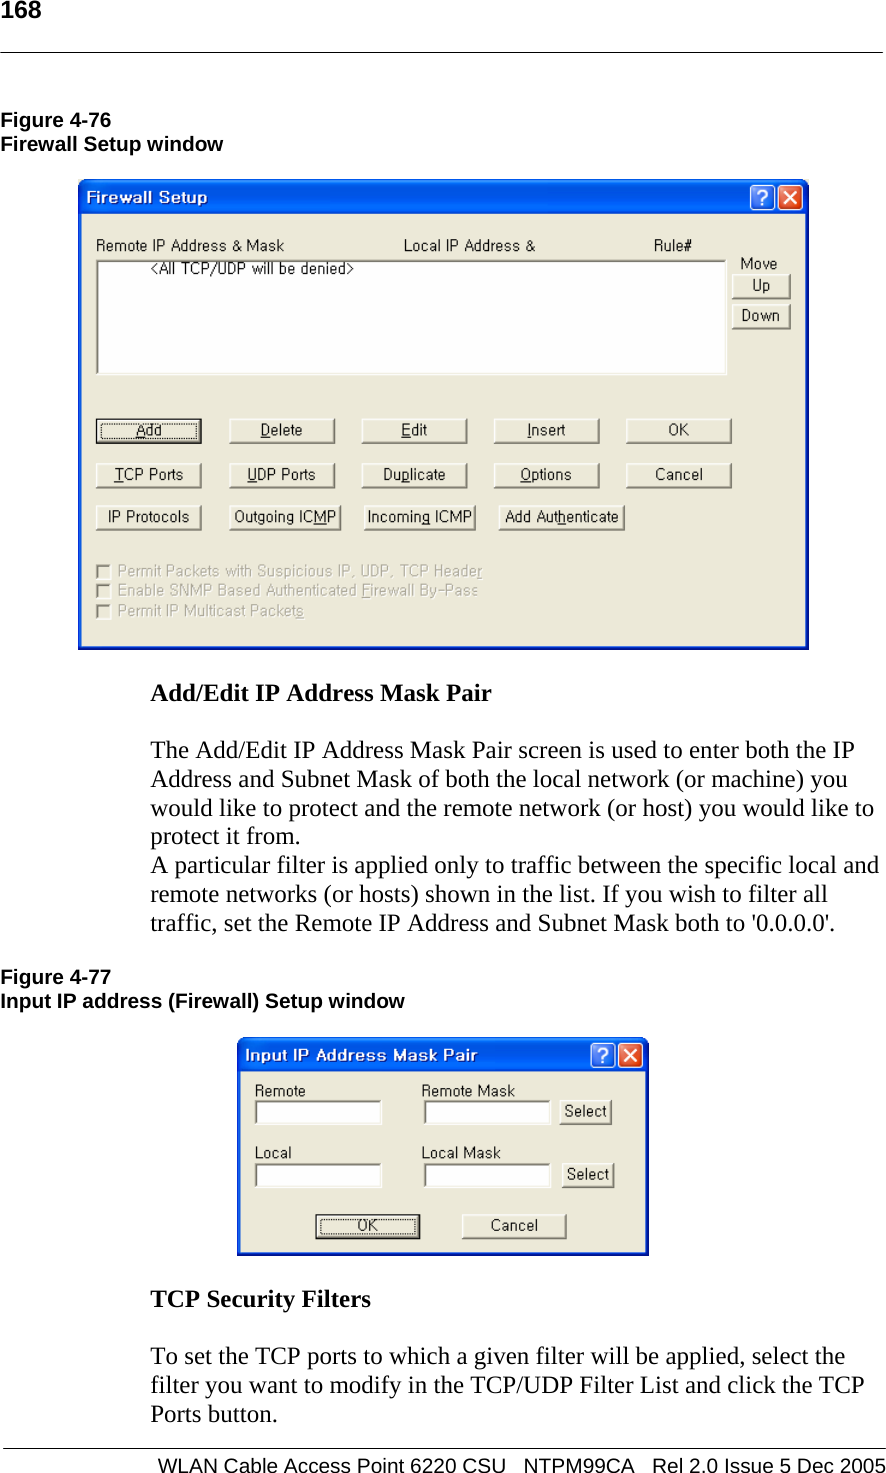   168  WLAN Cable Access Point 6220 CSU   NTPM99CA   Rel 2.0 Issue 5 Dec 2005 Figure 4-76 Firewall Setup window    Add/Edit IP Address Mask Pair   The Add/Edit IP Address Mask Pair screen is used to enter both the IP Address and Subnet Mask of both the local network (or machine) you would like to protect and the remote network (or host) you would like to protect it from. A particular filter is applied only to traffic between the specific local and remote networks (or hosts) shown in the list. If you wish to filter all traffic, set the Remote IP Address and Subnet Mask both to &apos;0.0.0.0&apos;.  Figure 4-77 Input IP address (Firewall) Setup window    TCP Security Filters   To set the TCP ports to which a given filter will be applied, select the filter you want to modify in the TCP/UDP Filter List and click the TCP Ports button. 